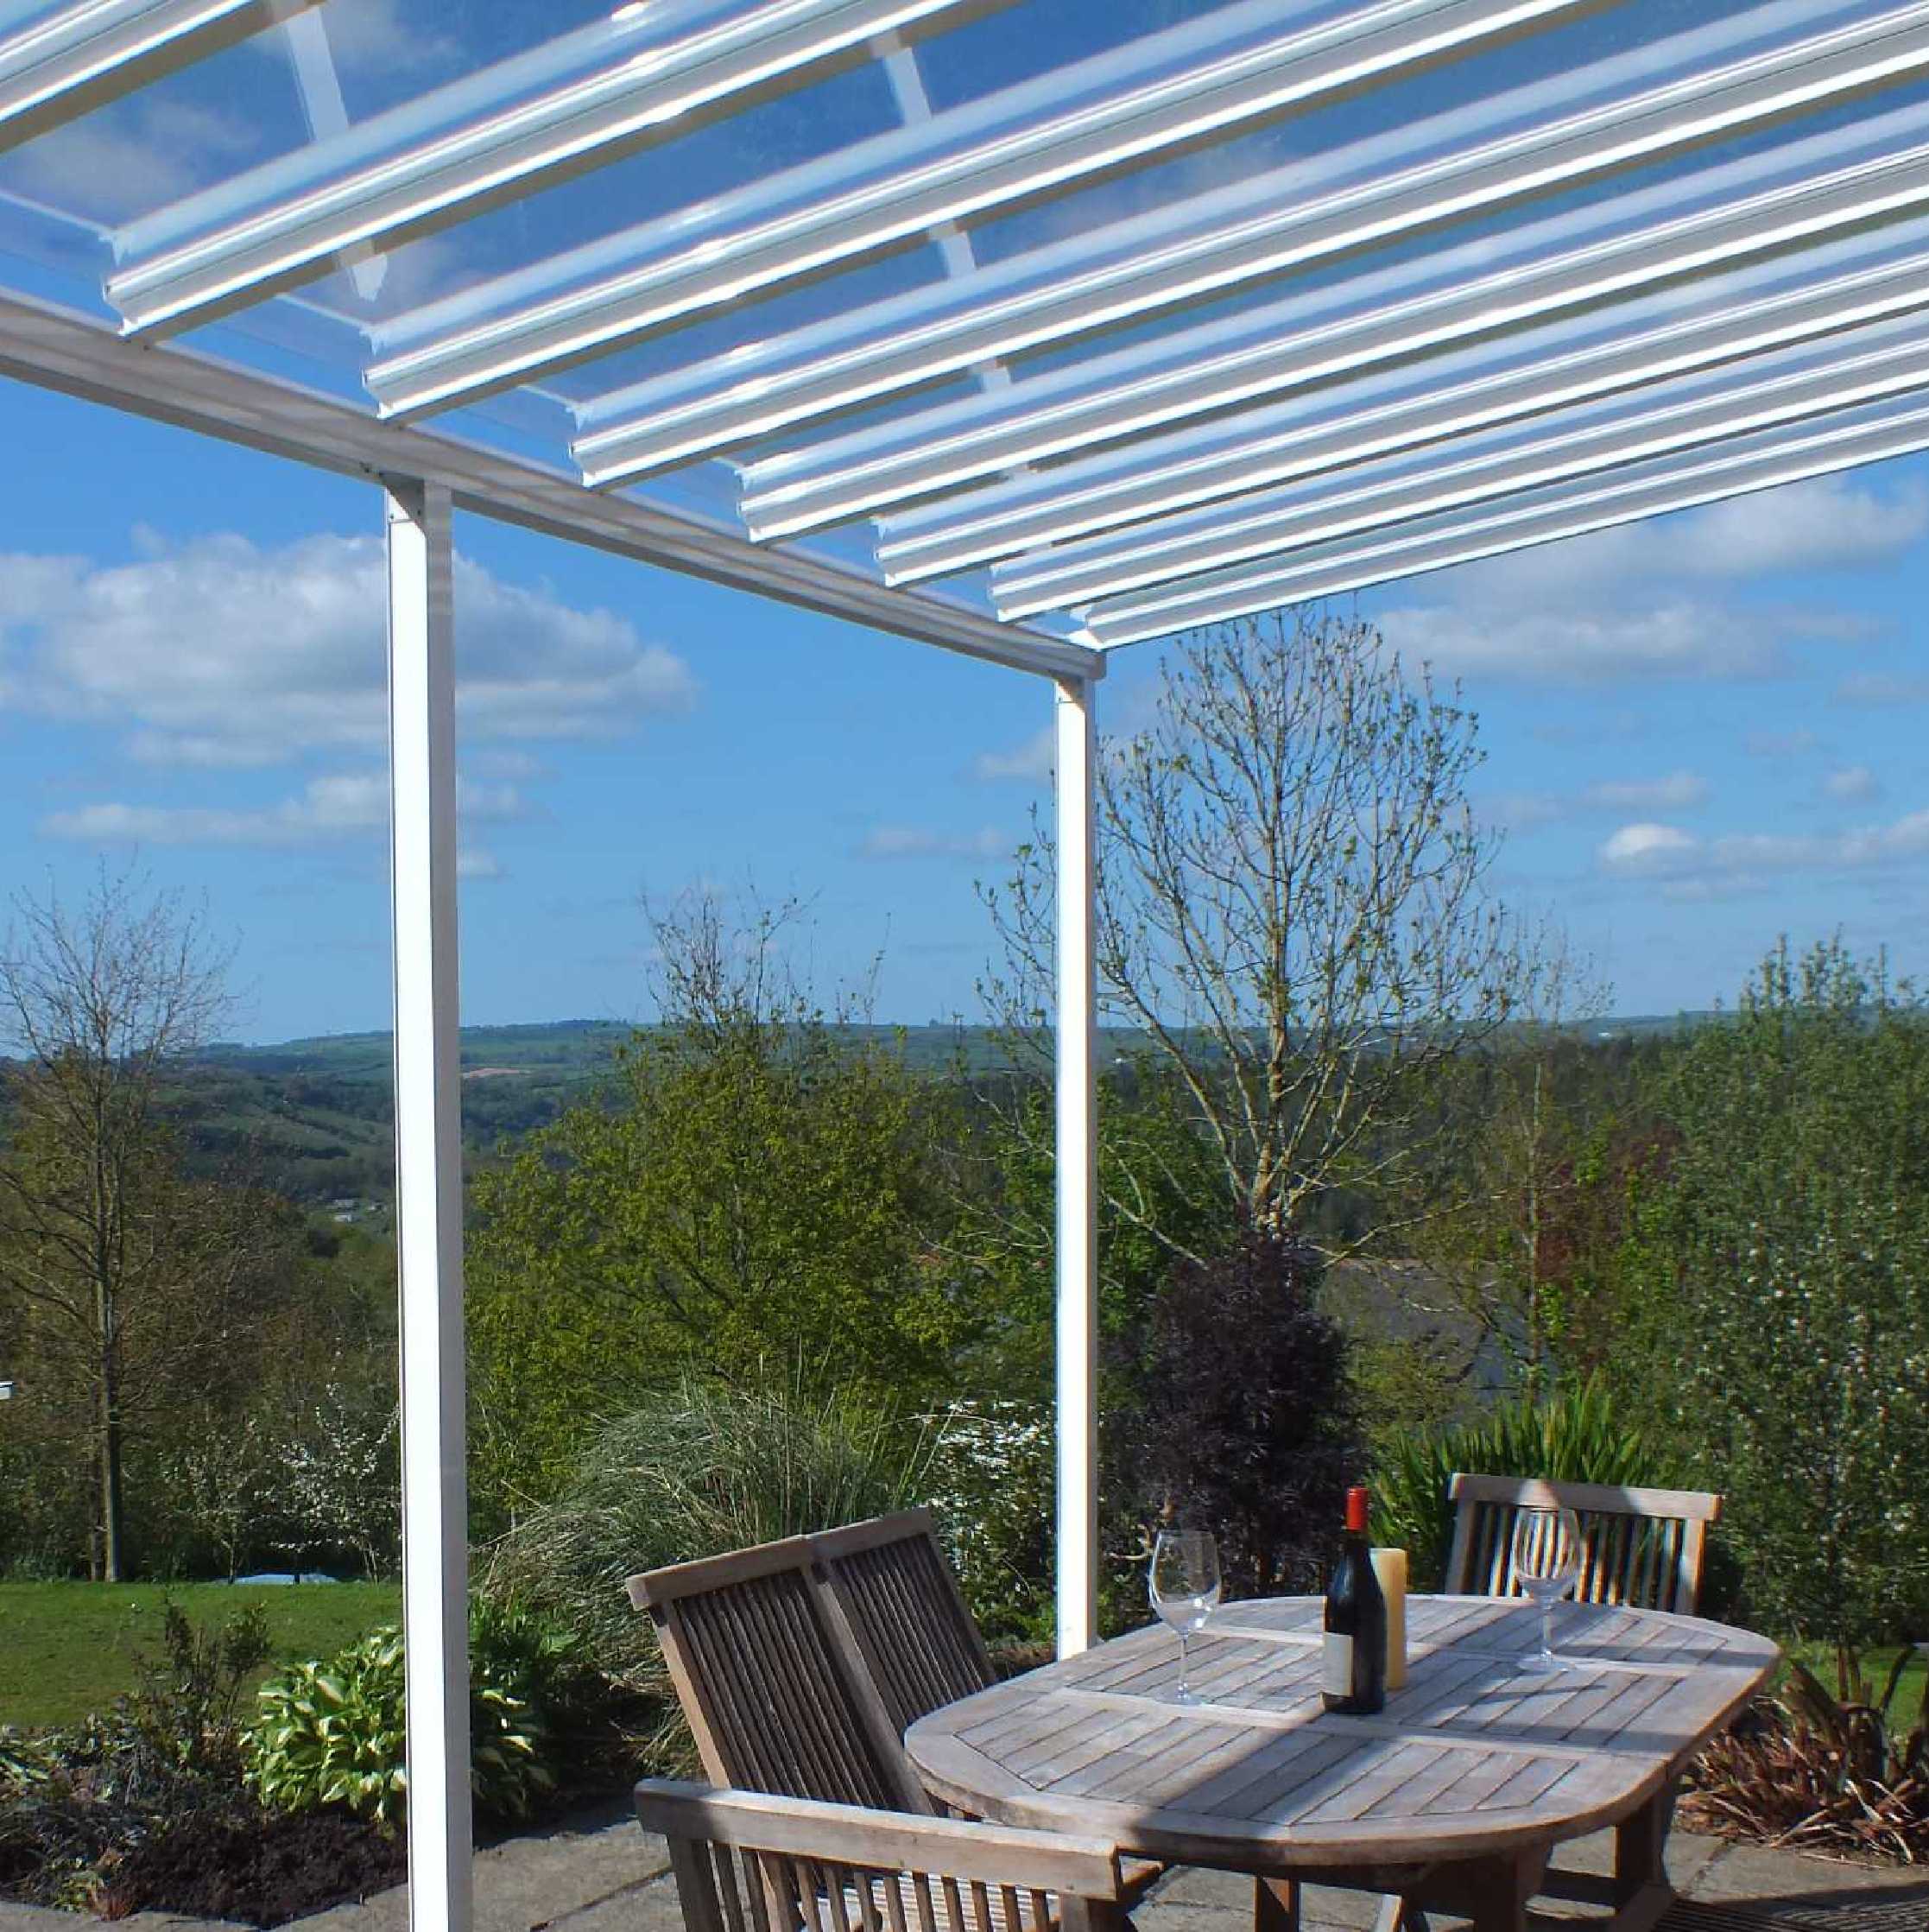 Buy Omega Smart Lean-To Canopy, White with 6mm Glass Clear Plate Polycarbonate Glazing - 7.7m (W) x 3.0m (P), (4) Supporting Posts online today